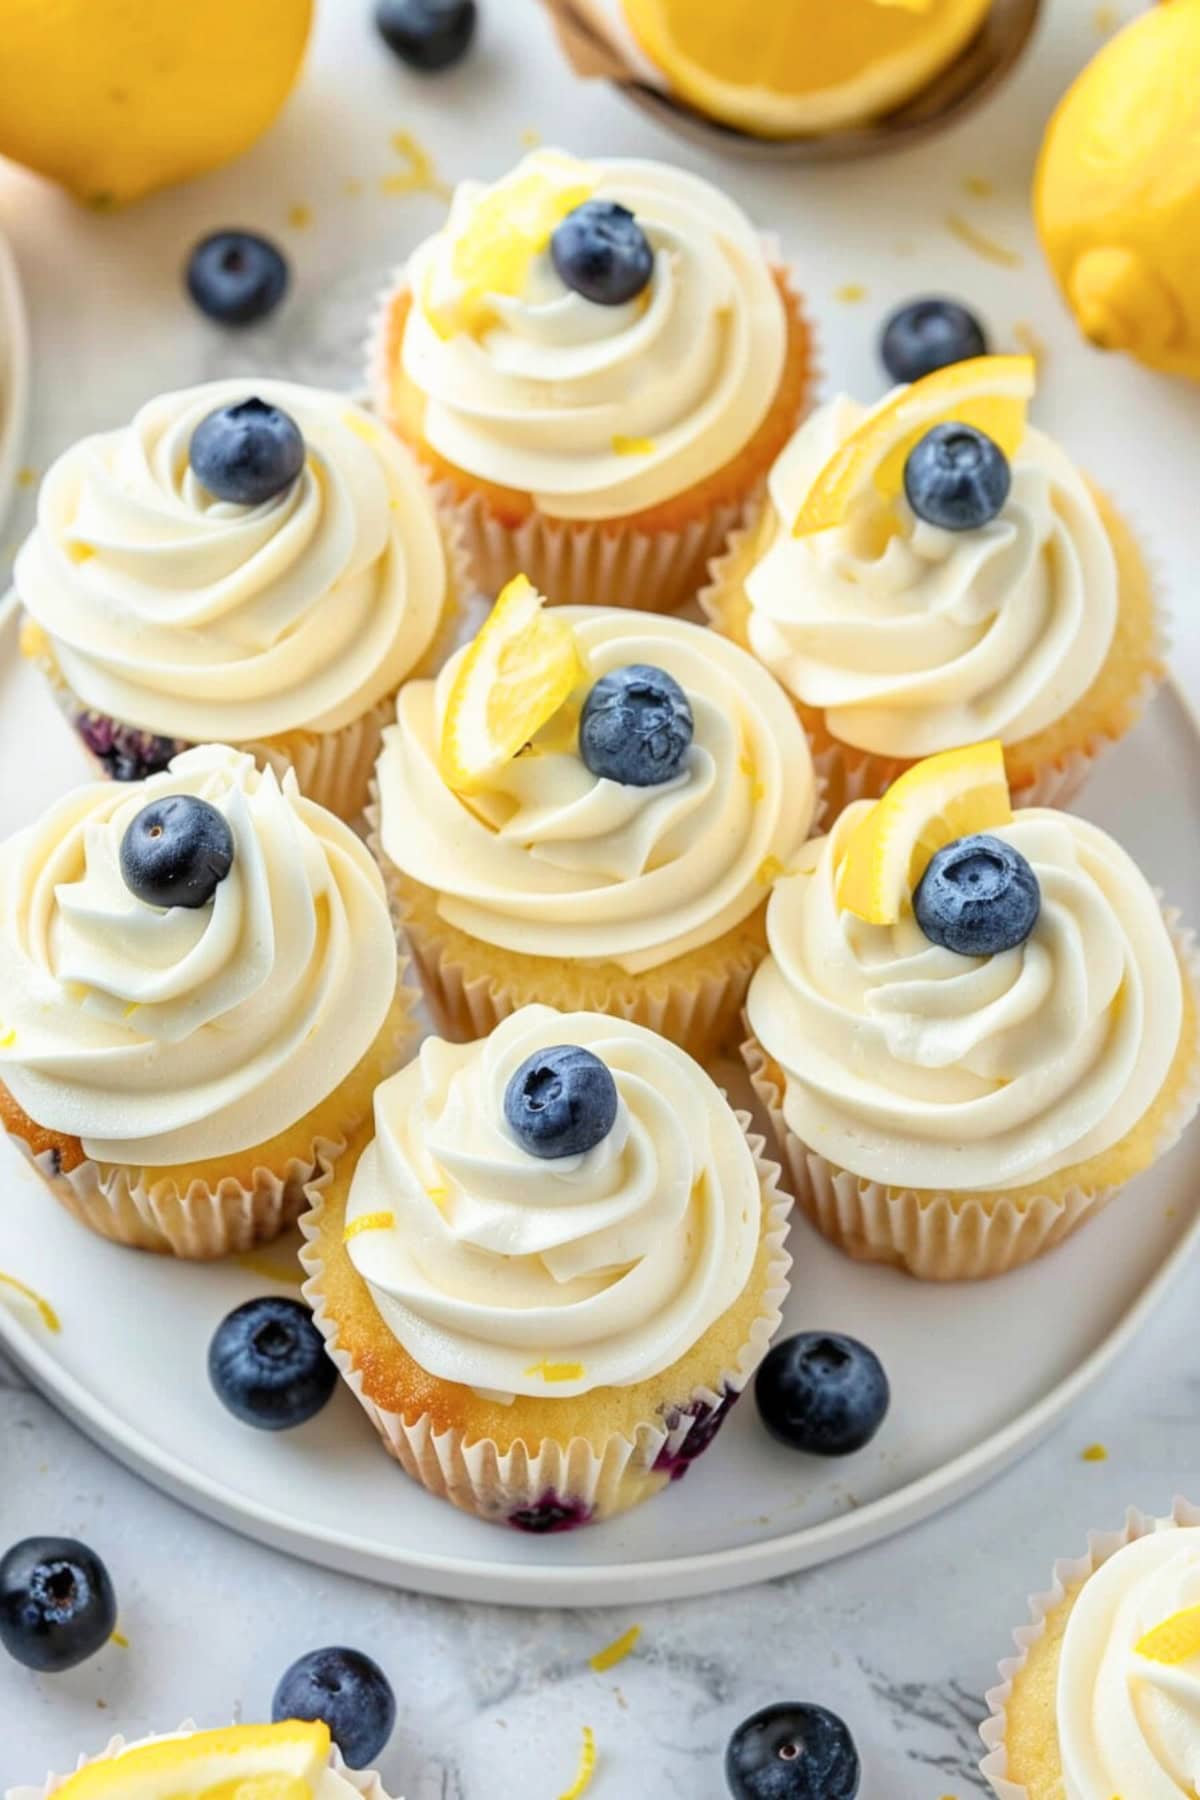 Cupcakes with lemon and blueberry topped with creamy buttercream frosting served in a plate.